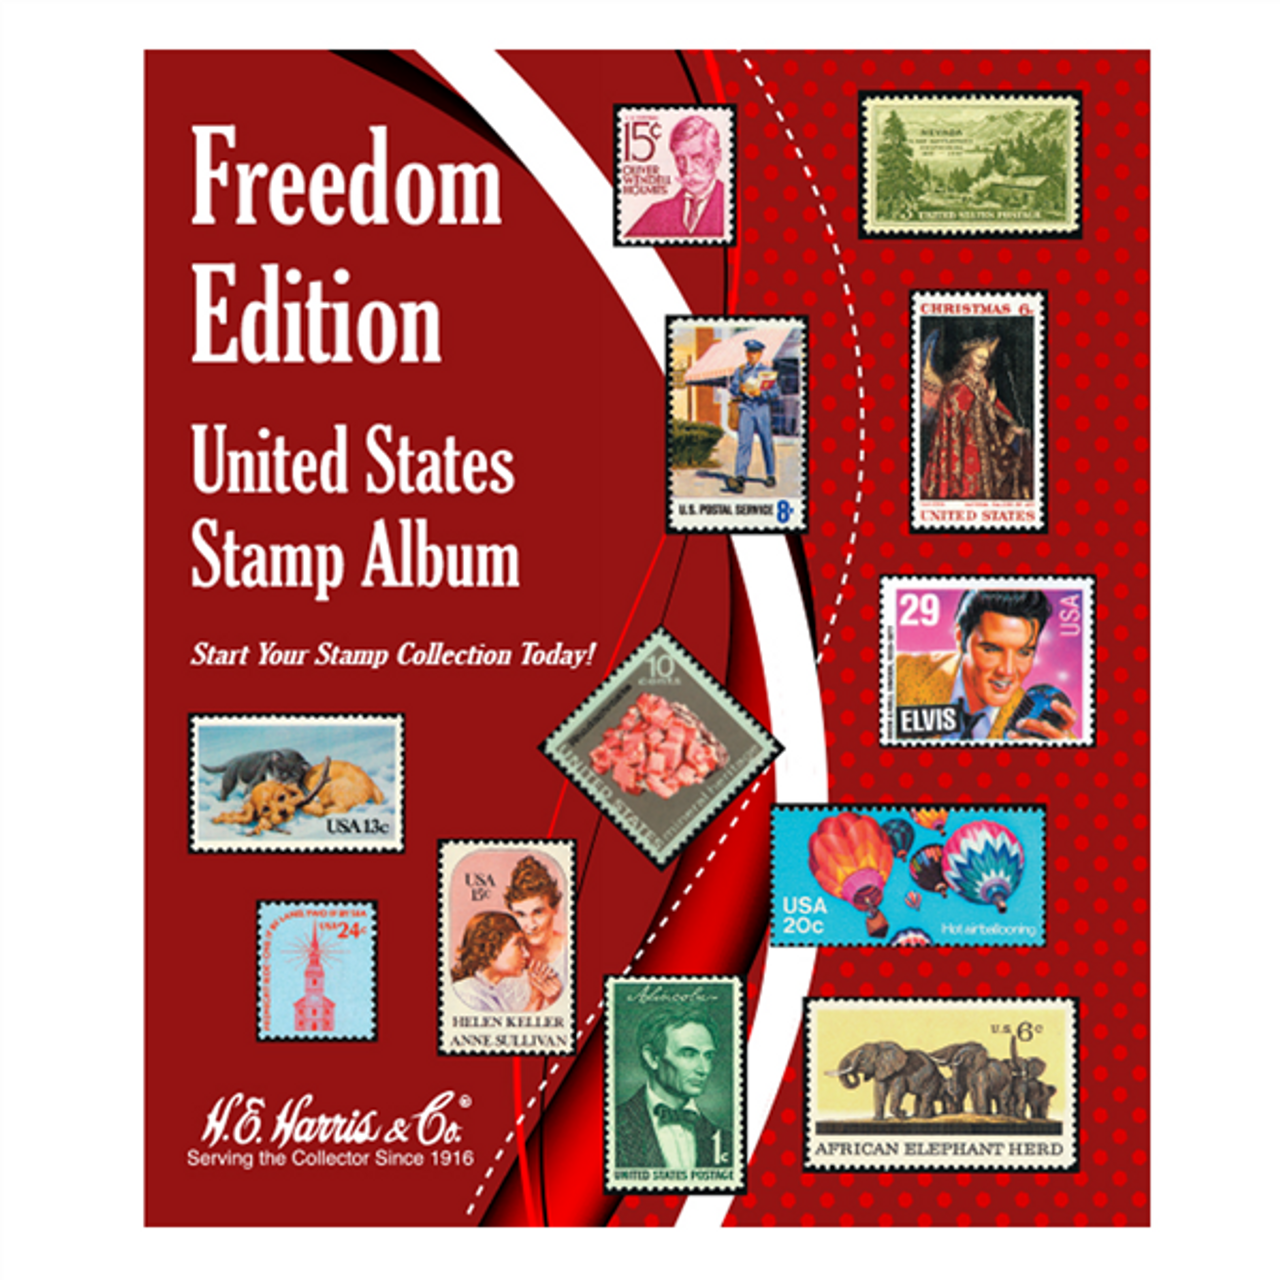 Stamp Album For Collectors: The Ultimate Book for Collecting